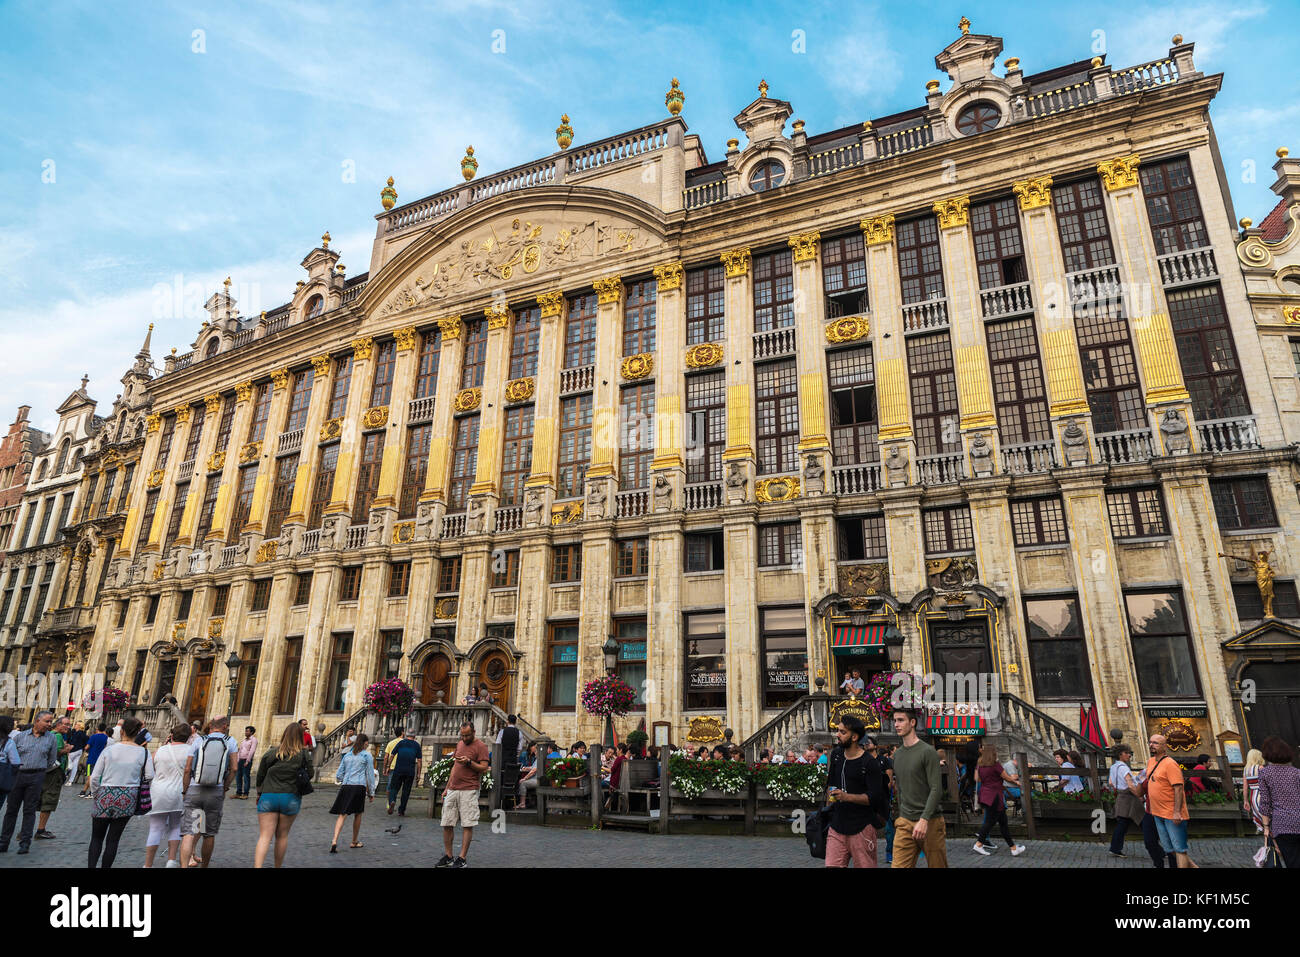 Brussels, Belgium - August 26, 2017: Mansion of the Dukes of Brabant at the Grand Place with people walking around in Brussels, Belgium Stock Photo